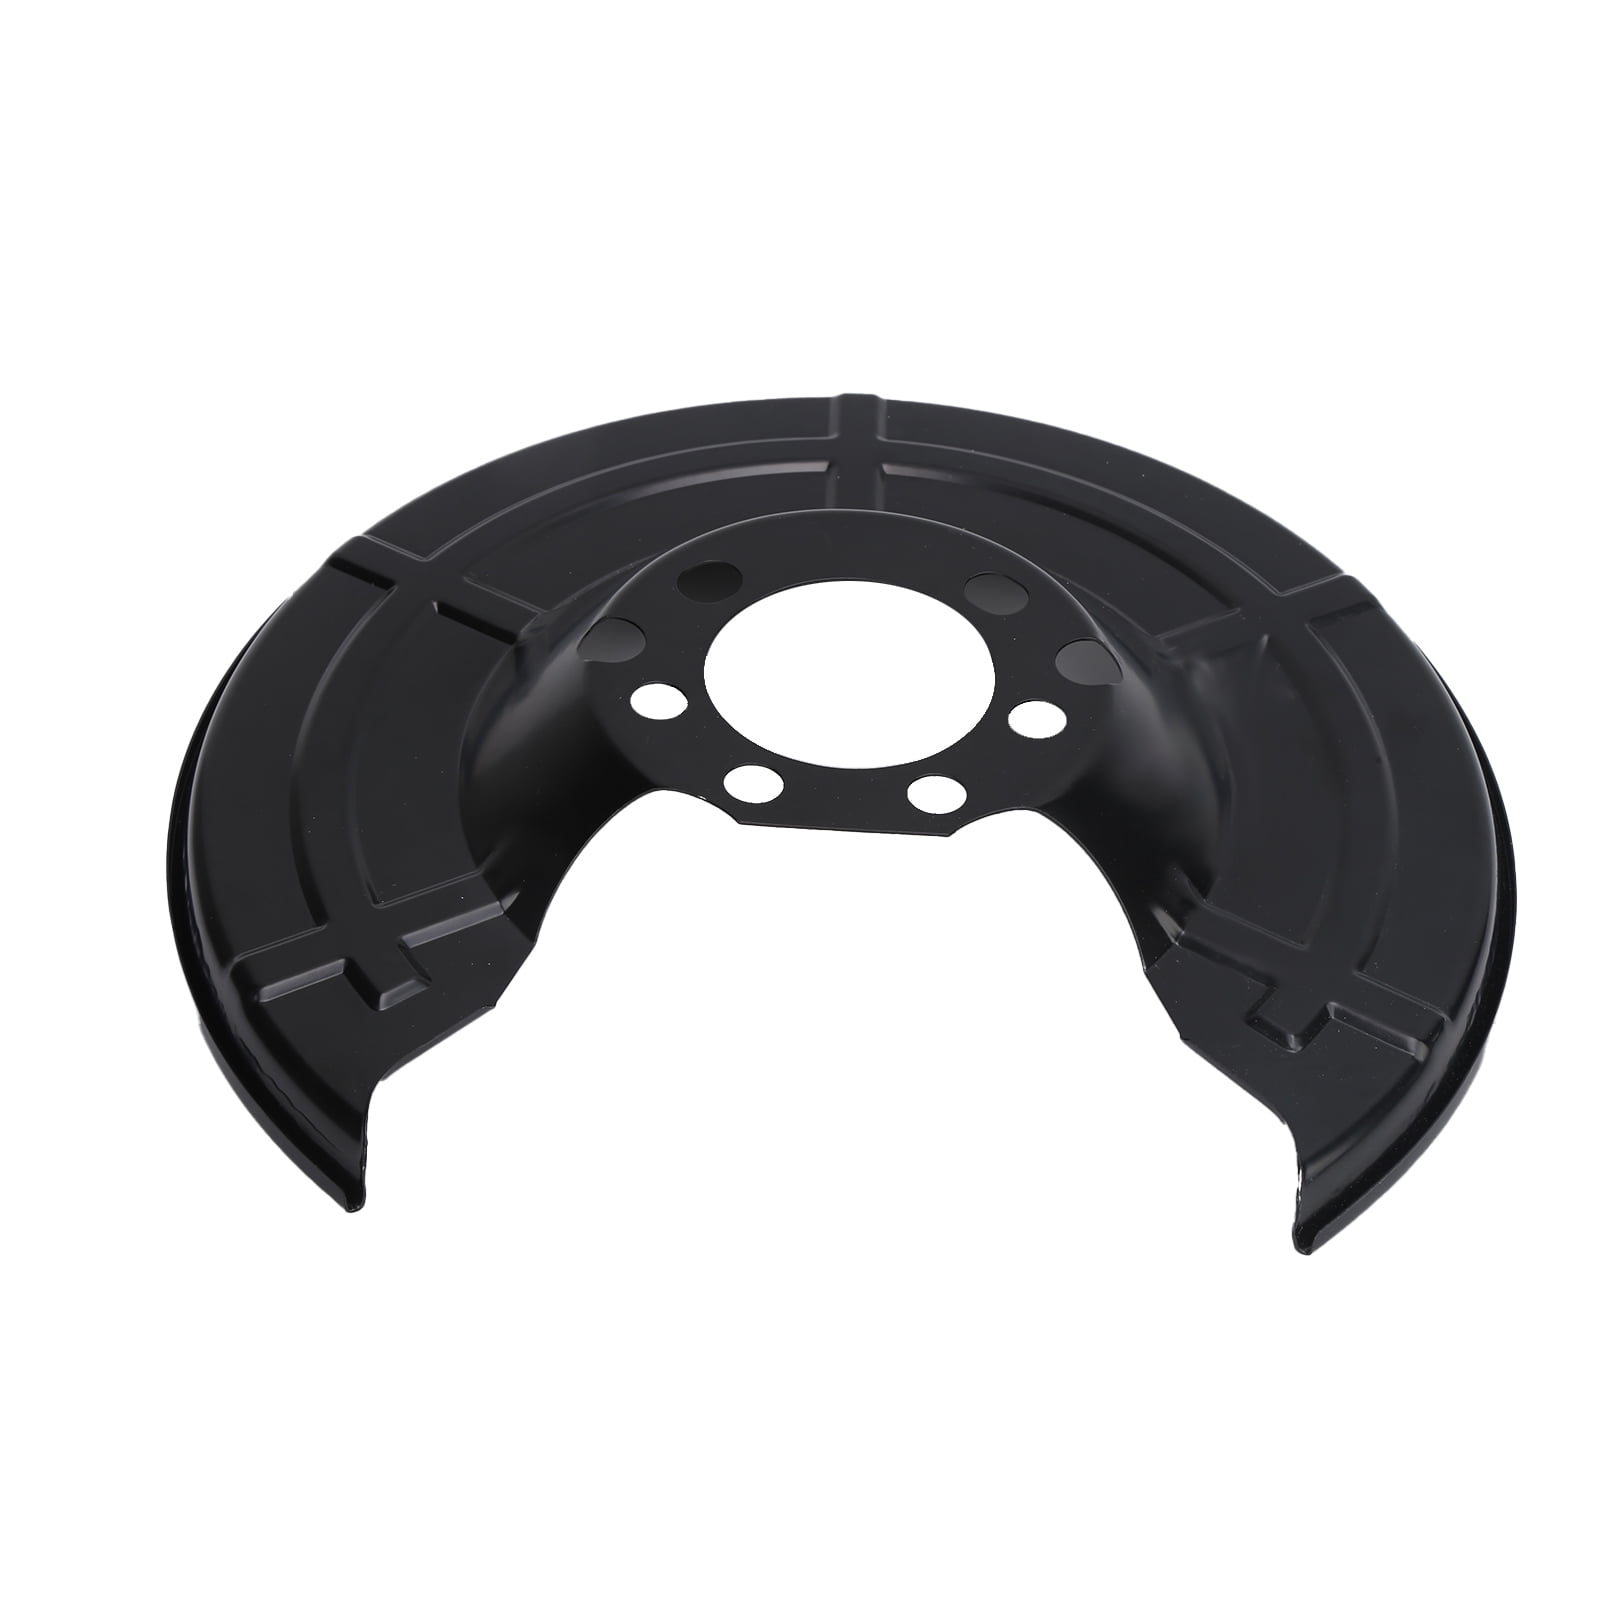 Brake Disc Plate, Brake Disc Dust Shield Effective Standard Specification  Replacement For All Models With Rear Discs For Protect The Brake System